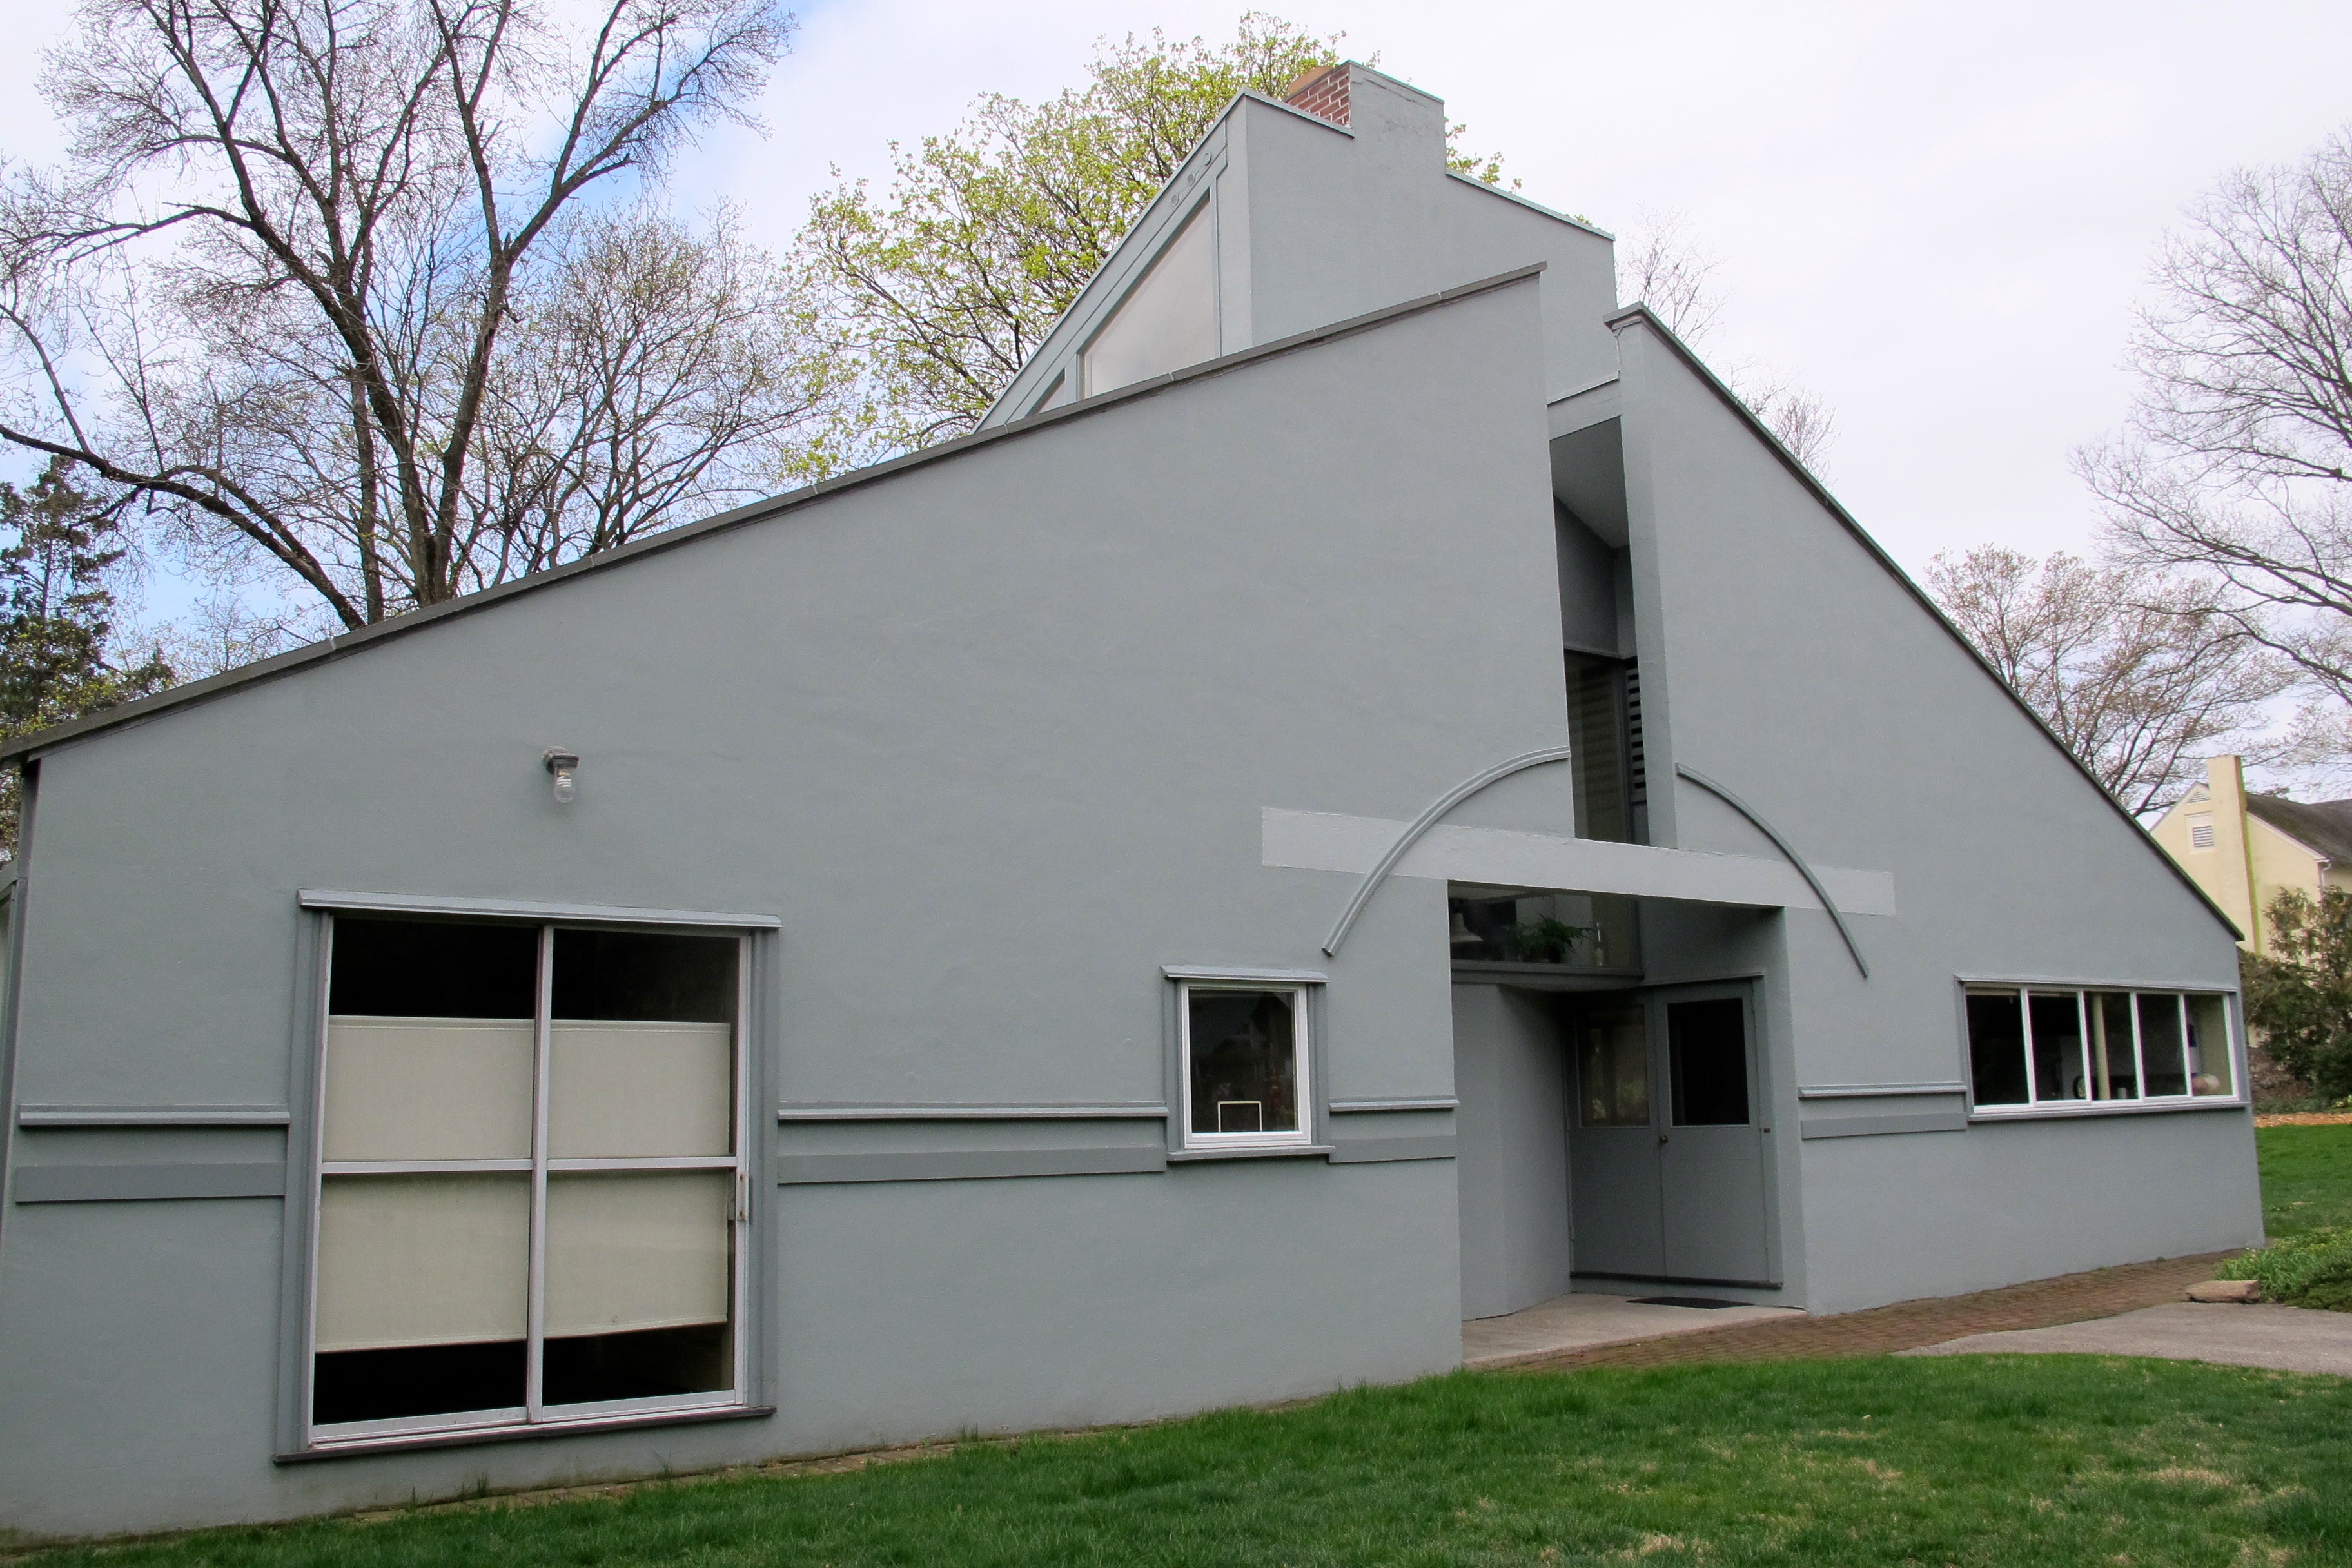 Vanna Venturi House was designated by the city as historic in 2016